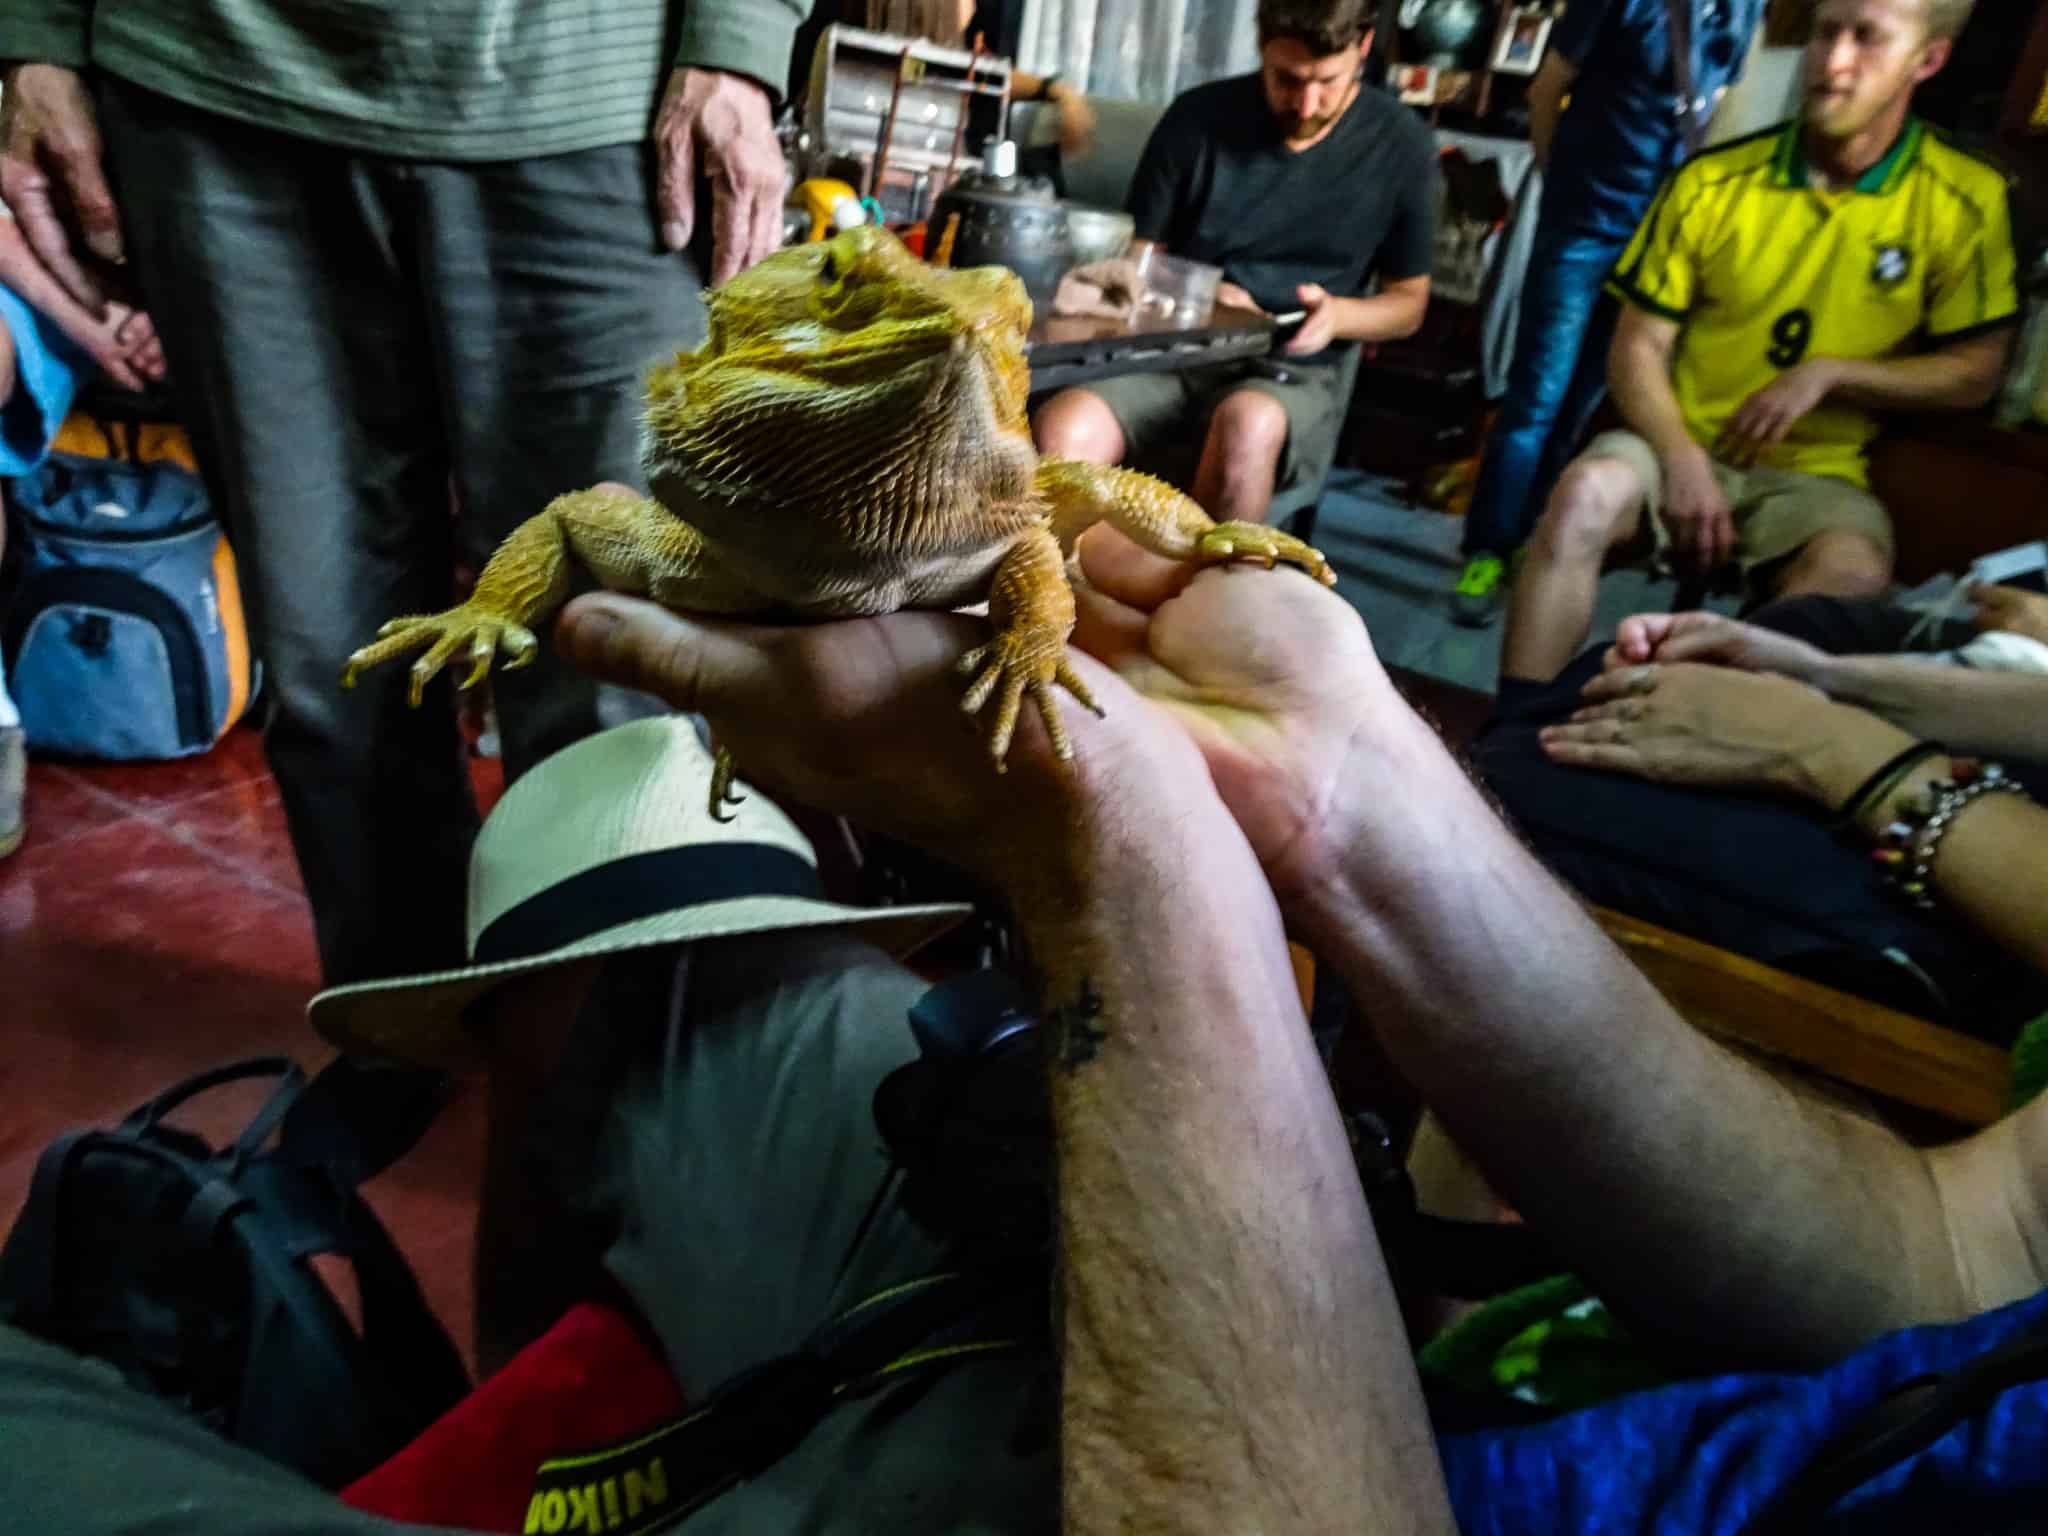 A stop along the walking tour of Beijing, handling reptiles in the capital of China